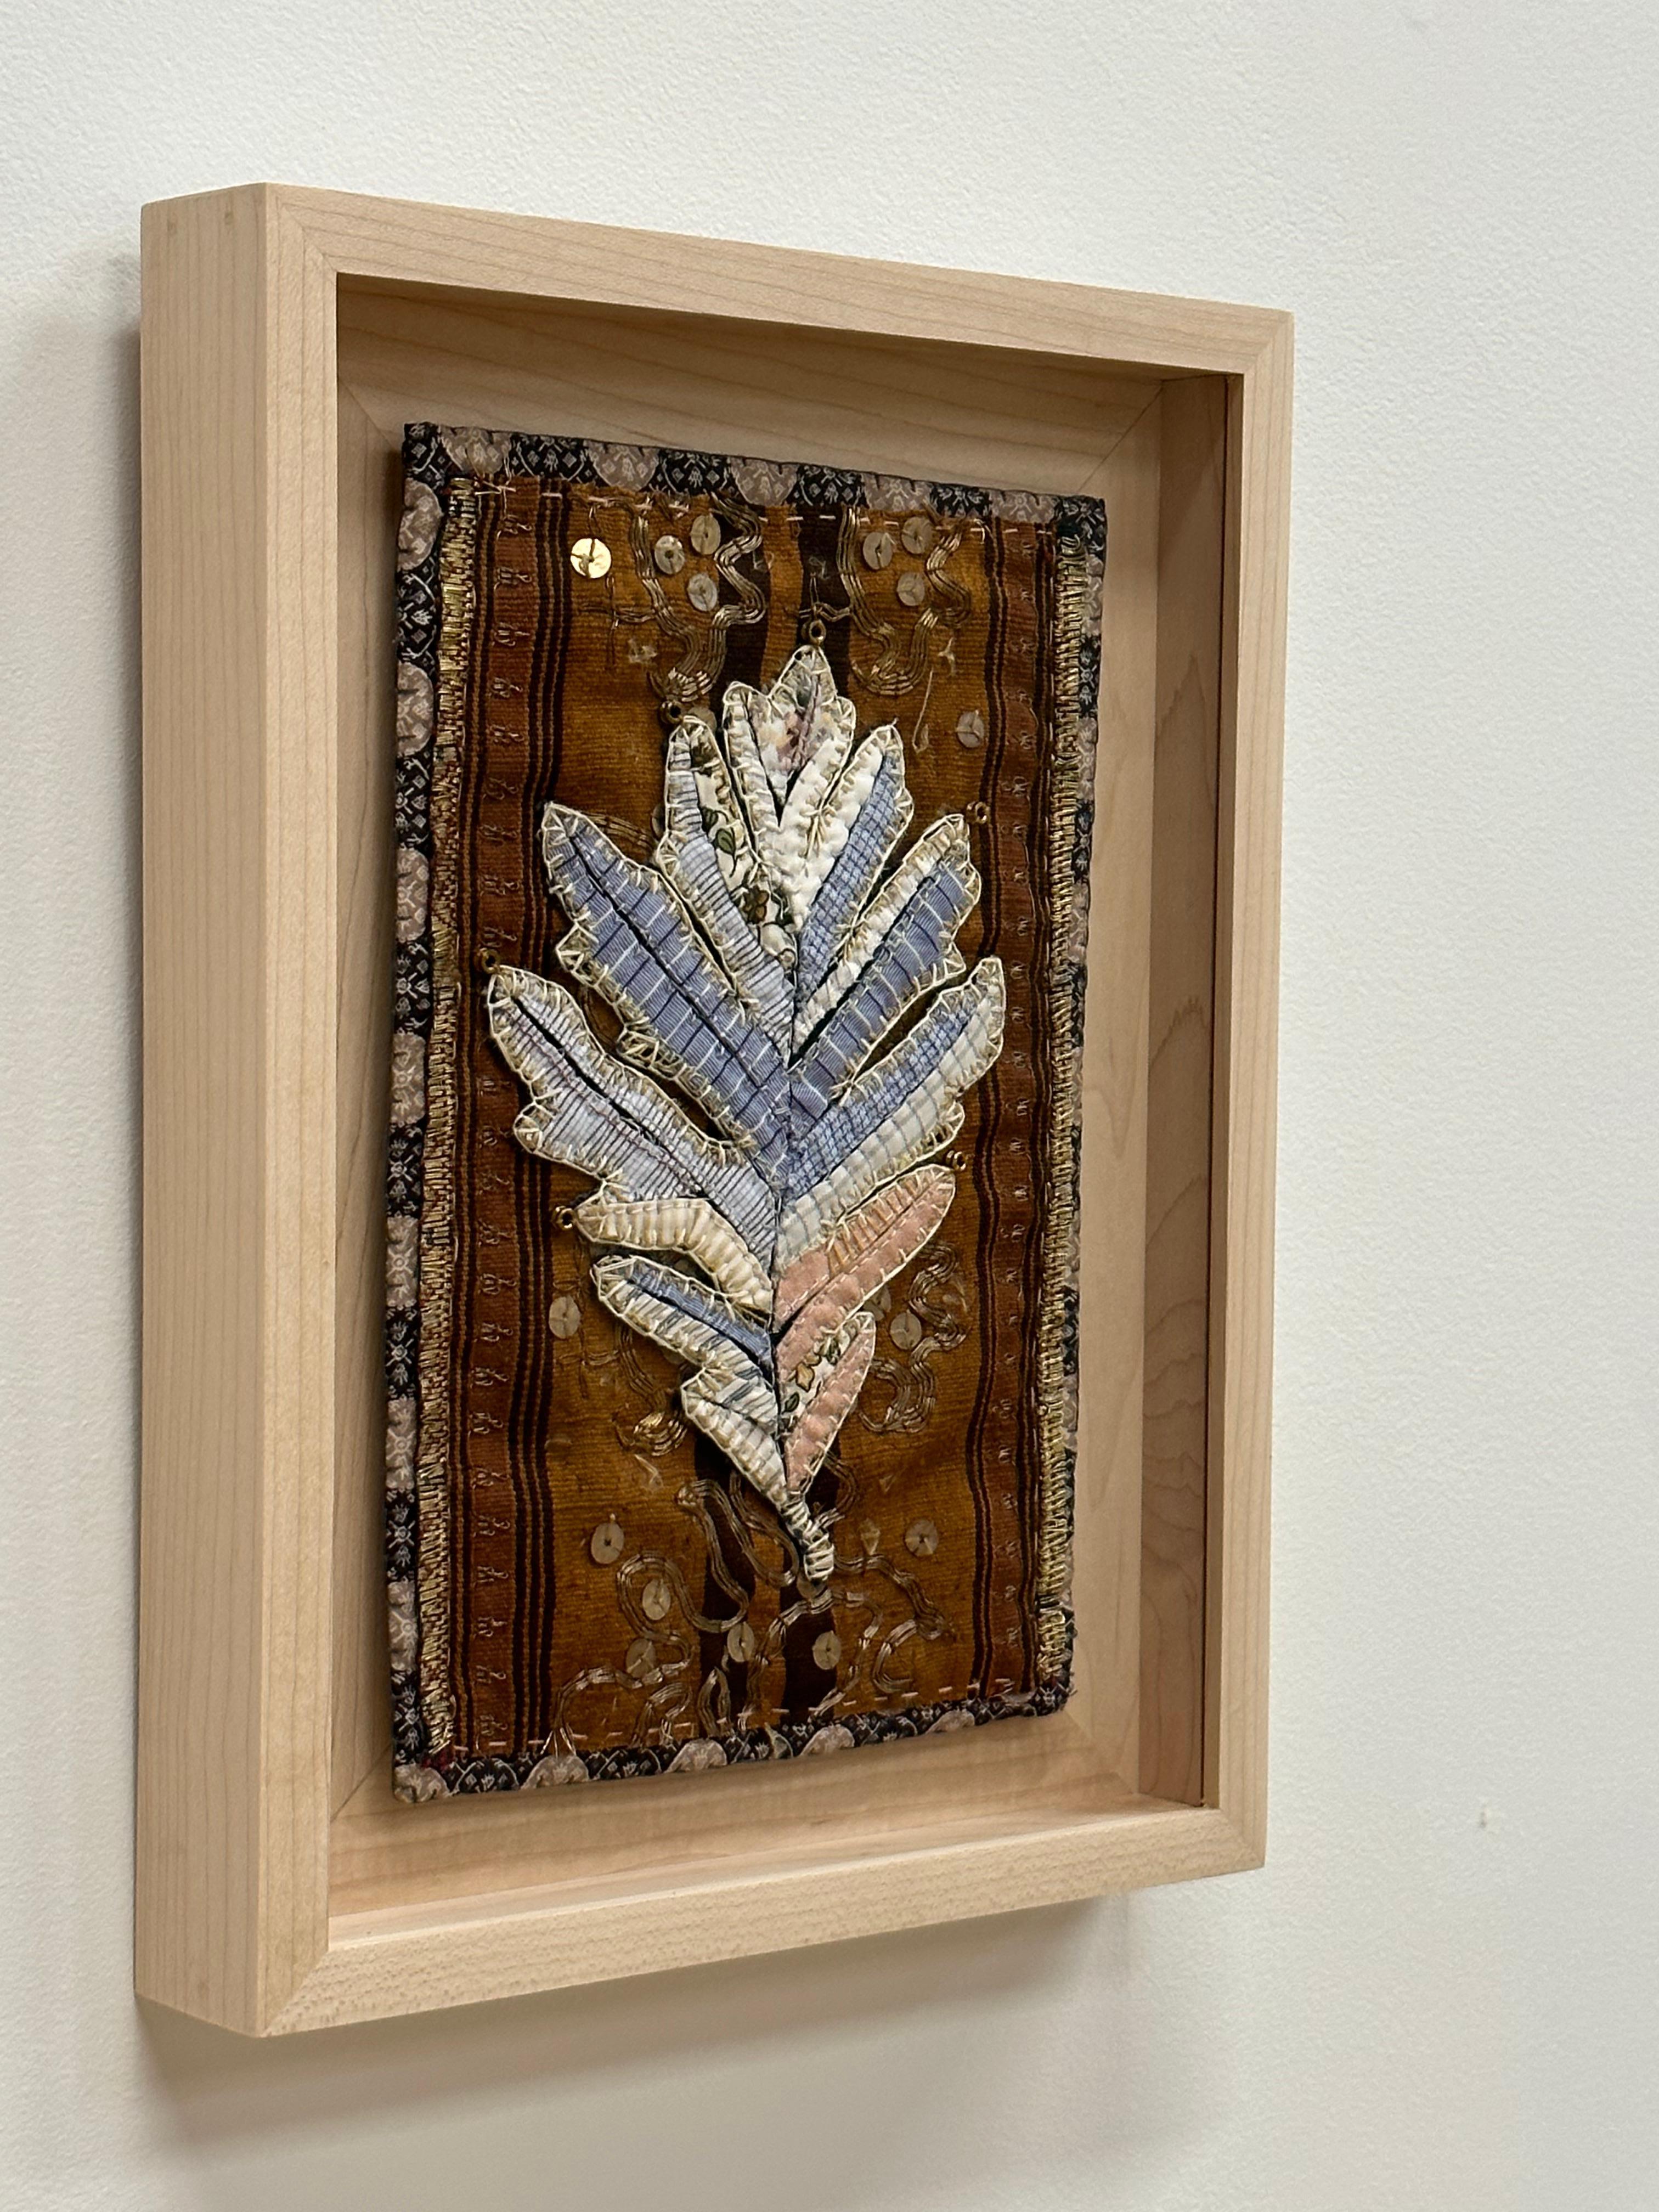 A white oak leaf is composed of delicately stitched donated clothing, textiles, notions, buttons and guitar string ball-ends and embellished with gold sequins, in warm golden brown, white, light peach, and pale blue checkered pattern and botanical